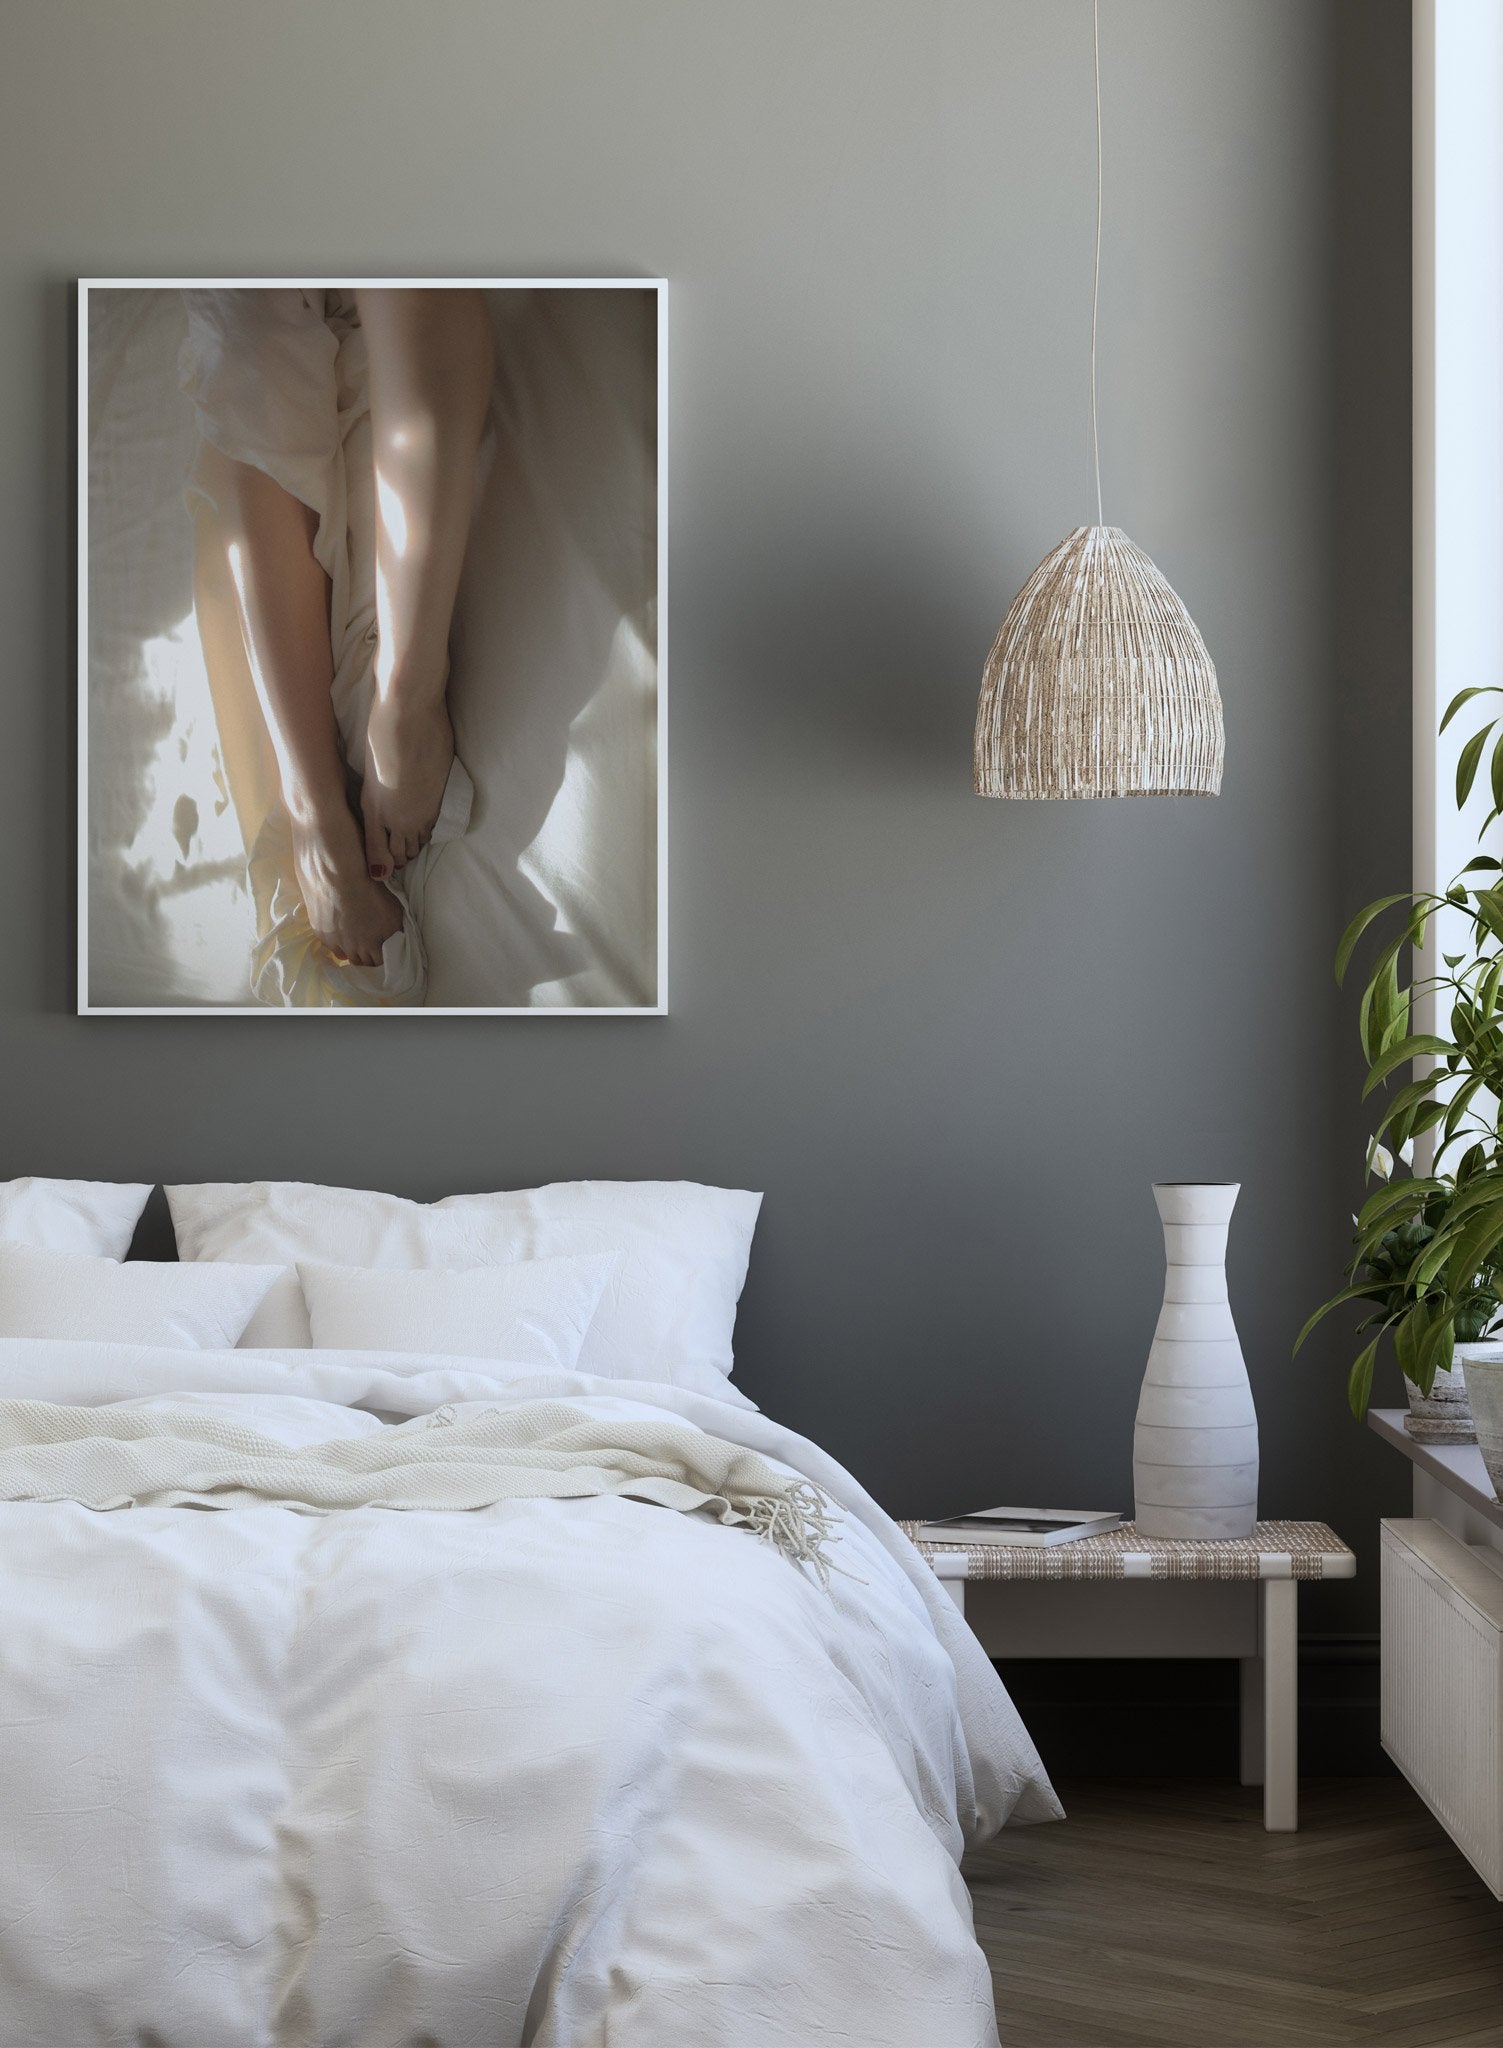 "Between the Sheets" is a minimalist beige and white photography poster by Opposite Wall of a woman’s nude legs, and feet in white bed sheets.